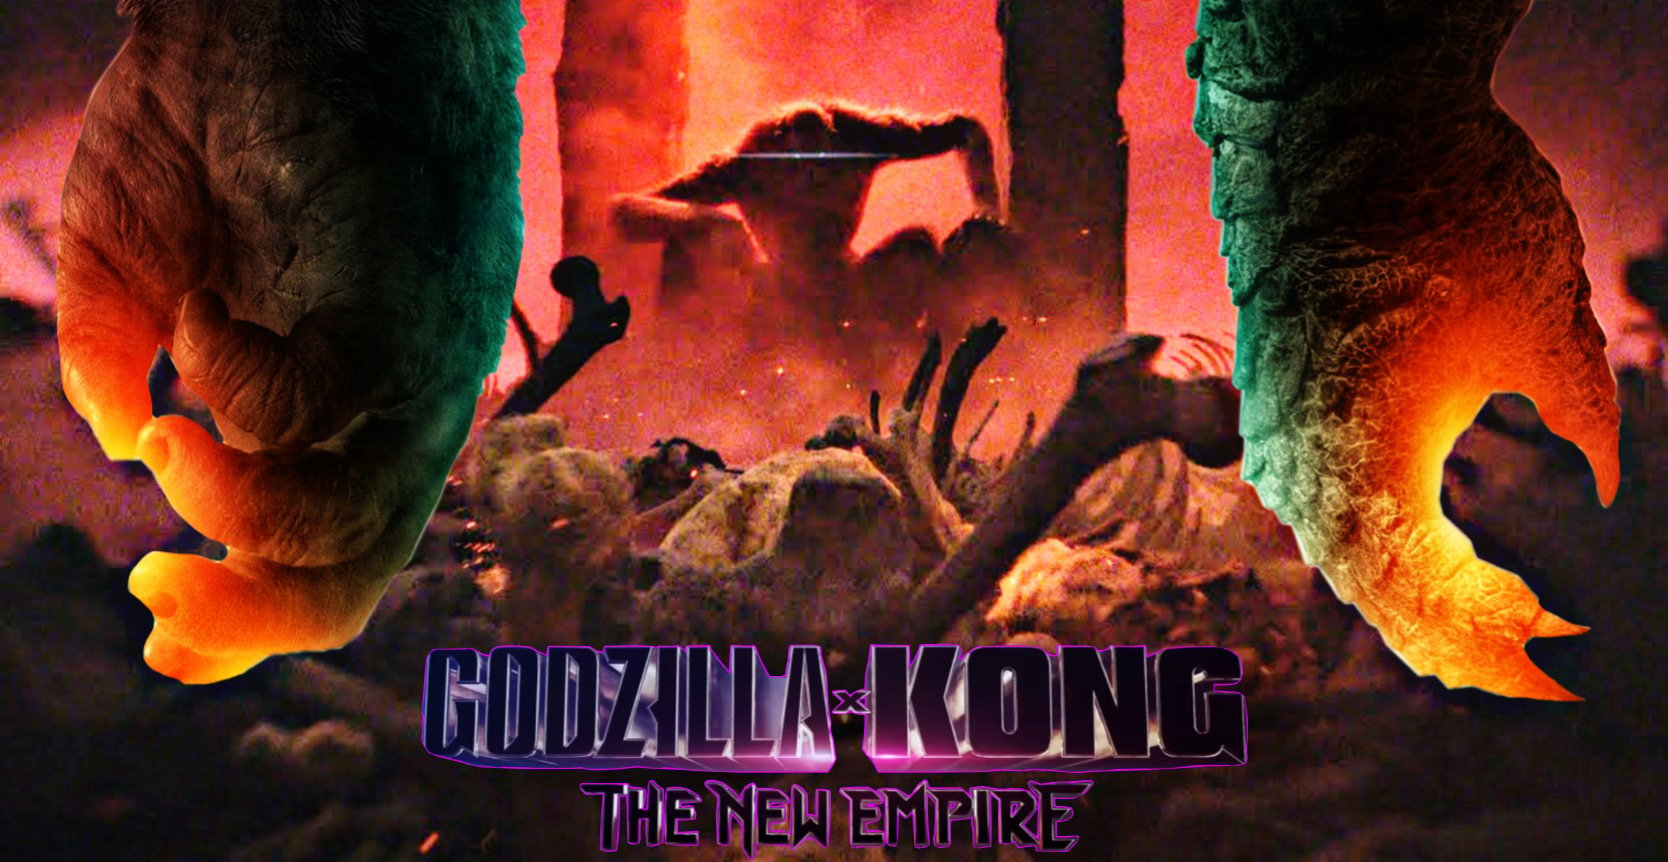 Godzilla x Kong: The New Empire wallpaper Resolution 1668x862 | Best Download this awesome wallpaper - Cool Wallpaper HD - CoolWallpaper-HD.com